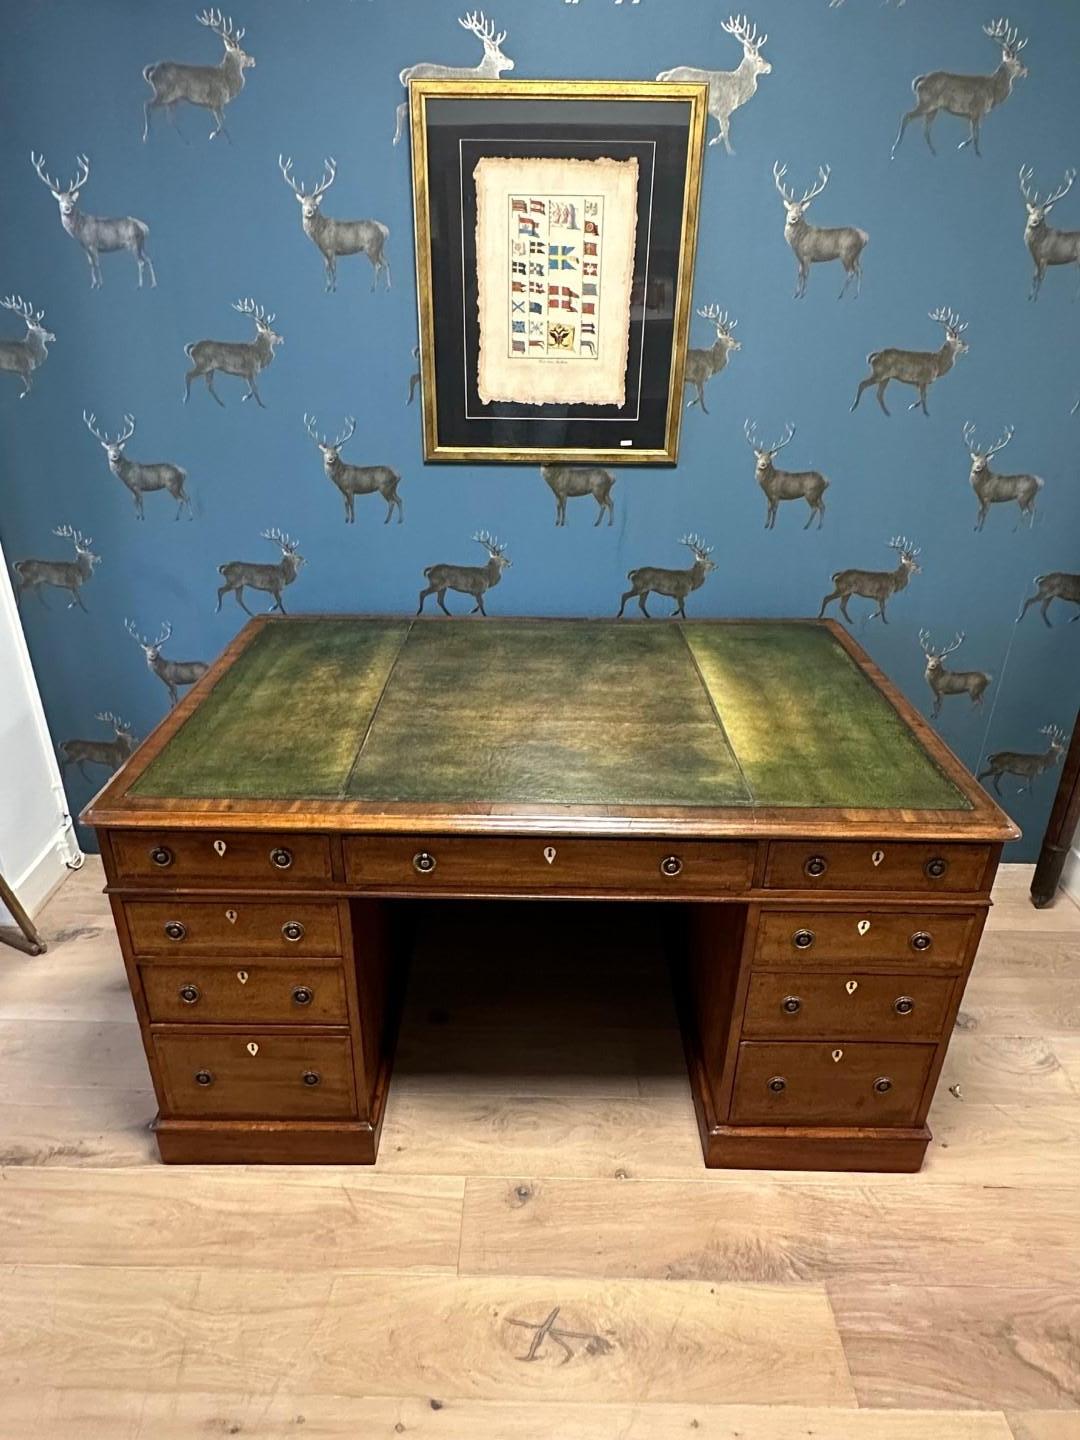 Beautiful antique mahogany desk with 9 drawers and 2 cabinets on the other side. Partly because of this, it can also be used as a partner desk.
Green leather top. The drawers are fitted with inlays. The desk is in very good condition.

Origin: